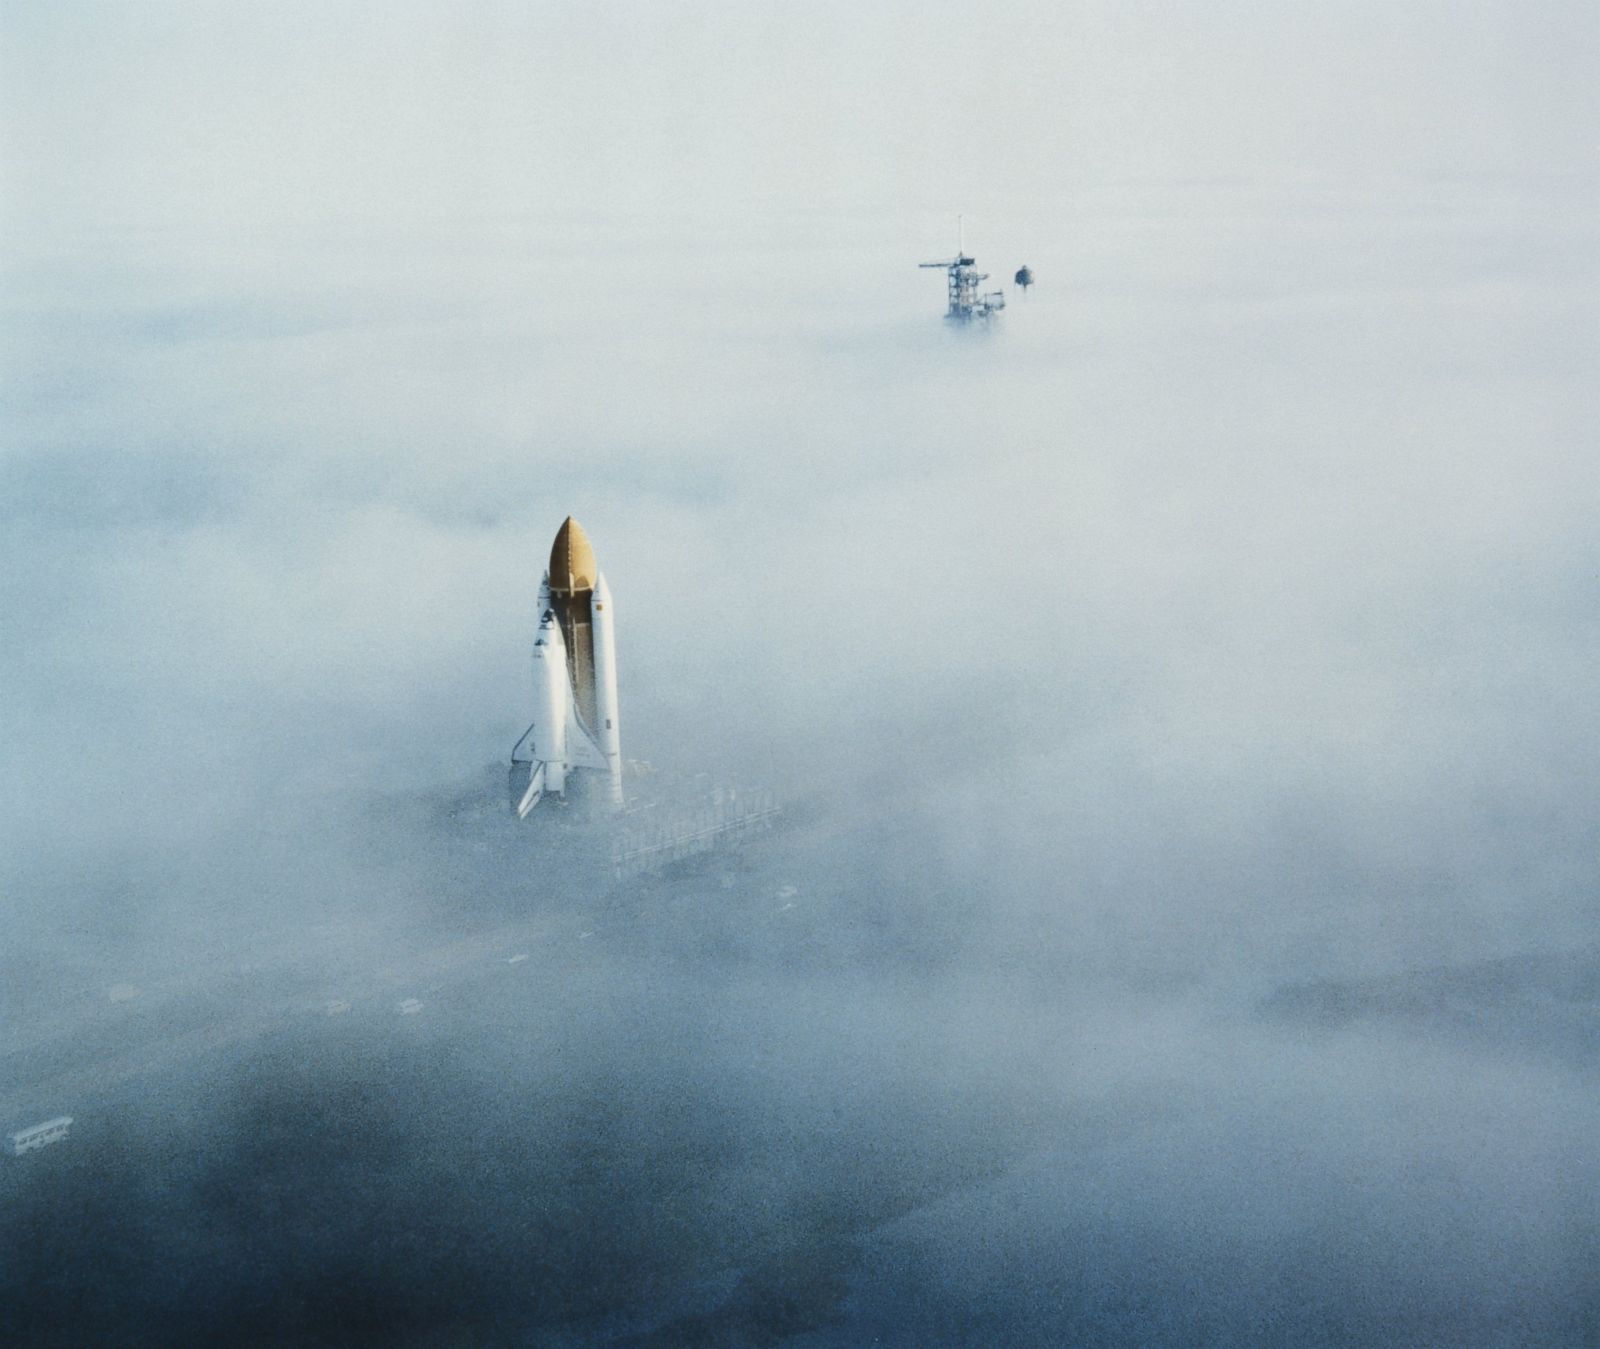 Picture | 30 Years Since the Space Shuttle Challenger Disaster - ABC News